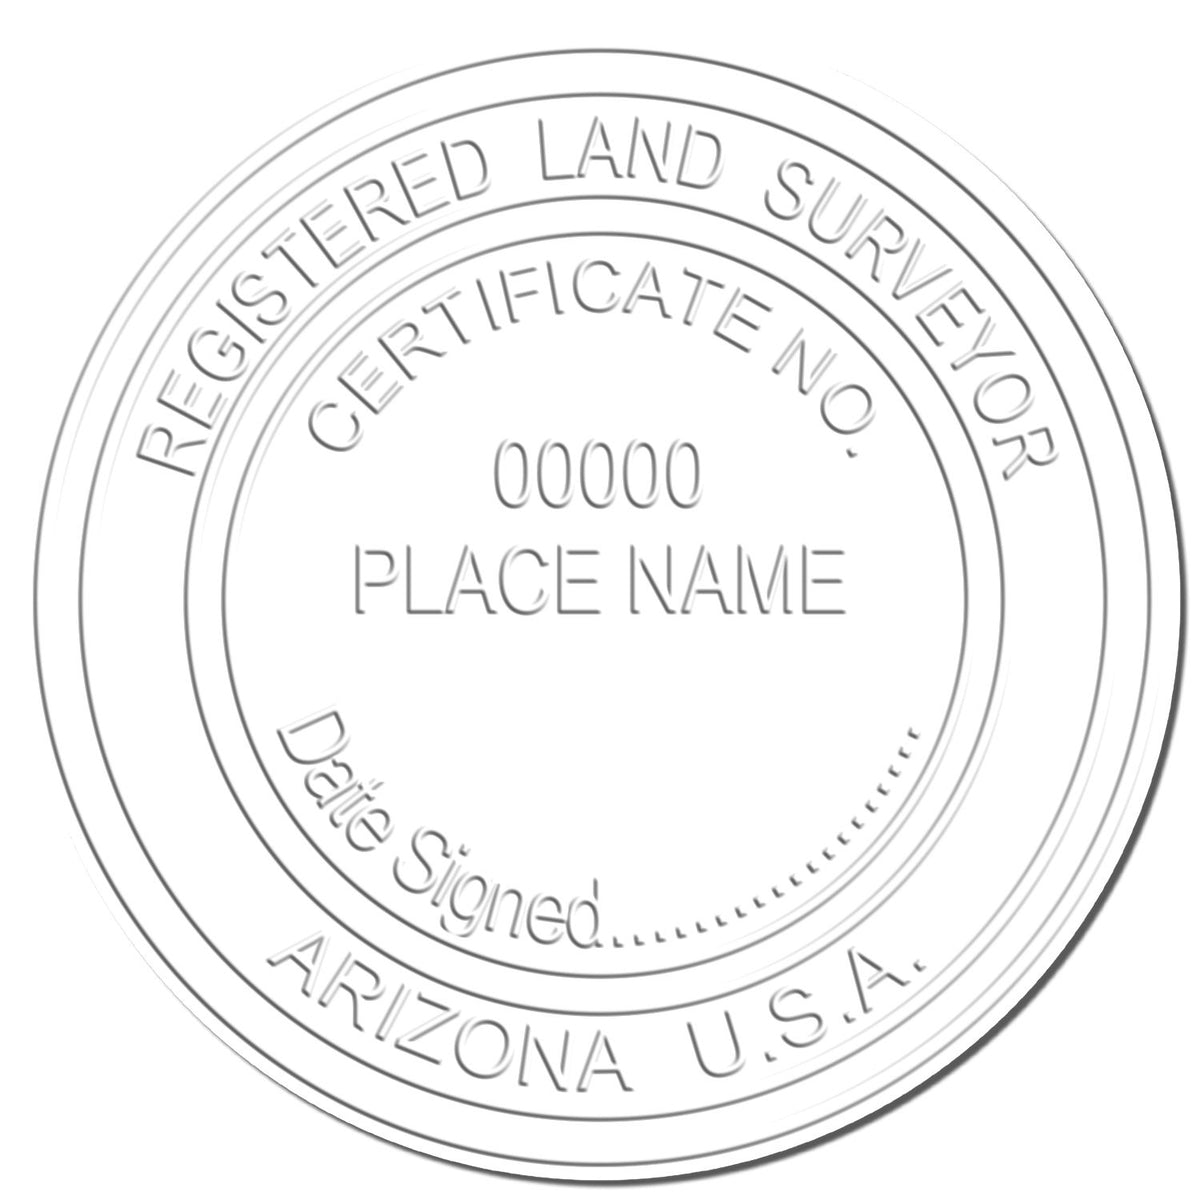 This paper is stamped with a sample imprint of the Gift Arizona Land Surveyor Seal, signifying its quality and reliability.